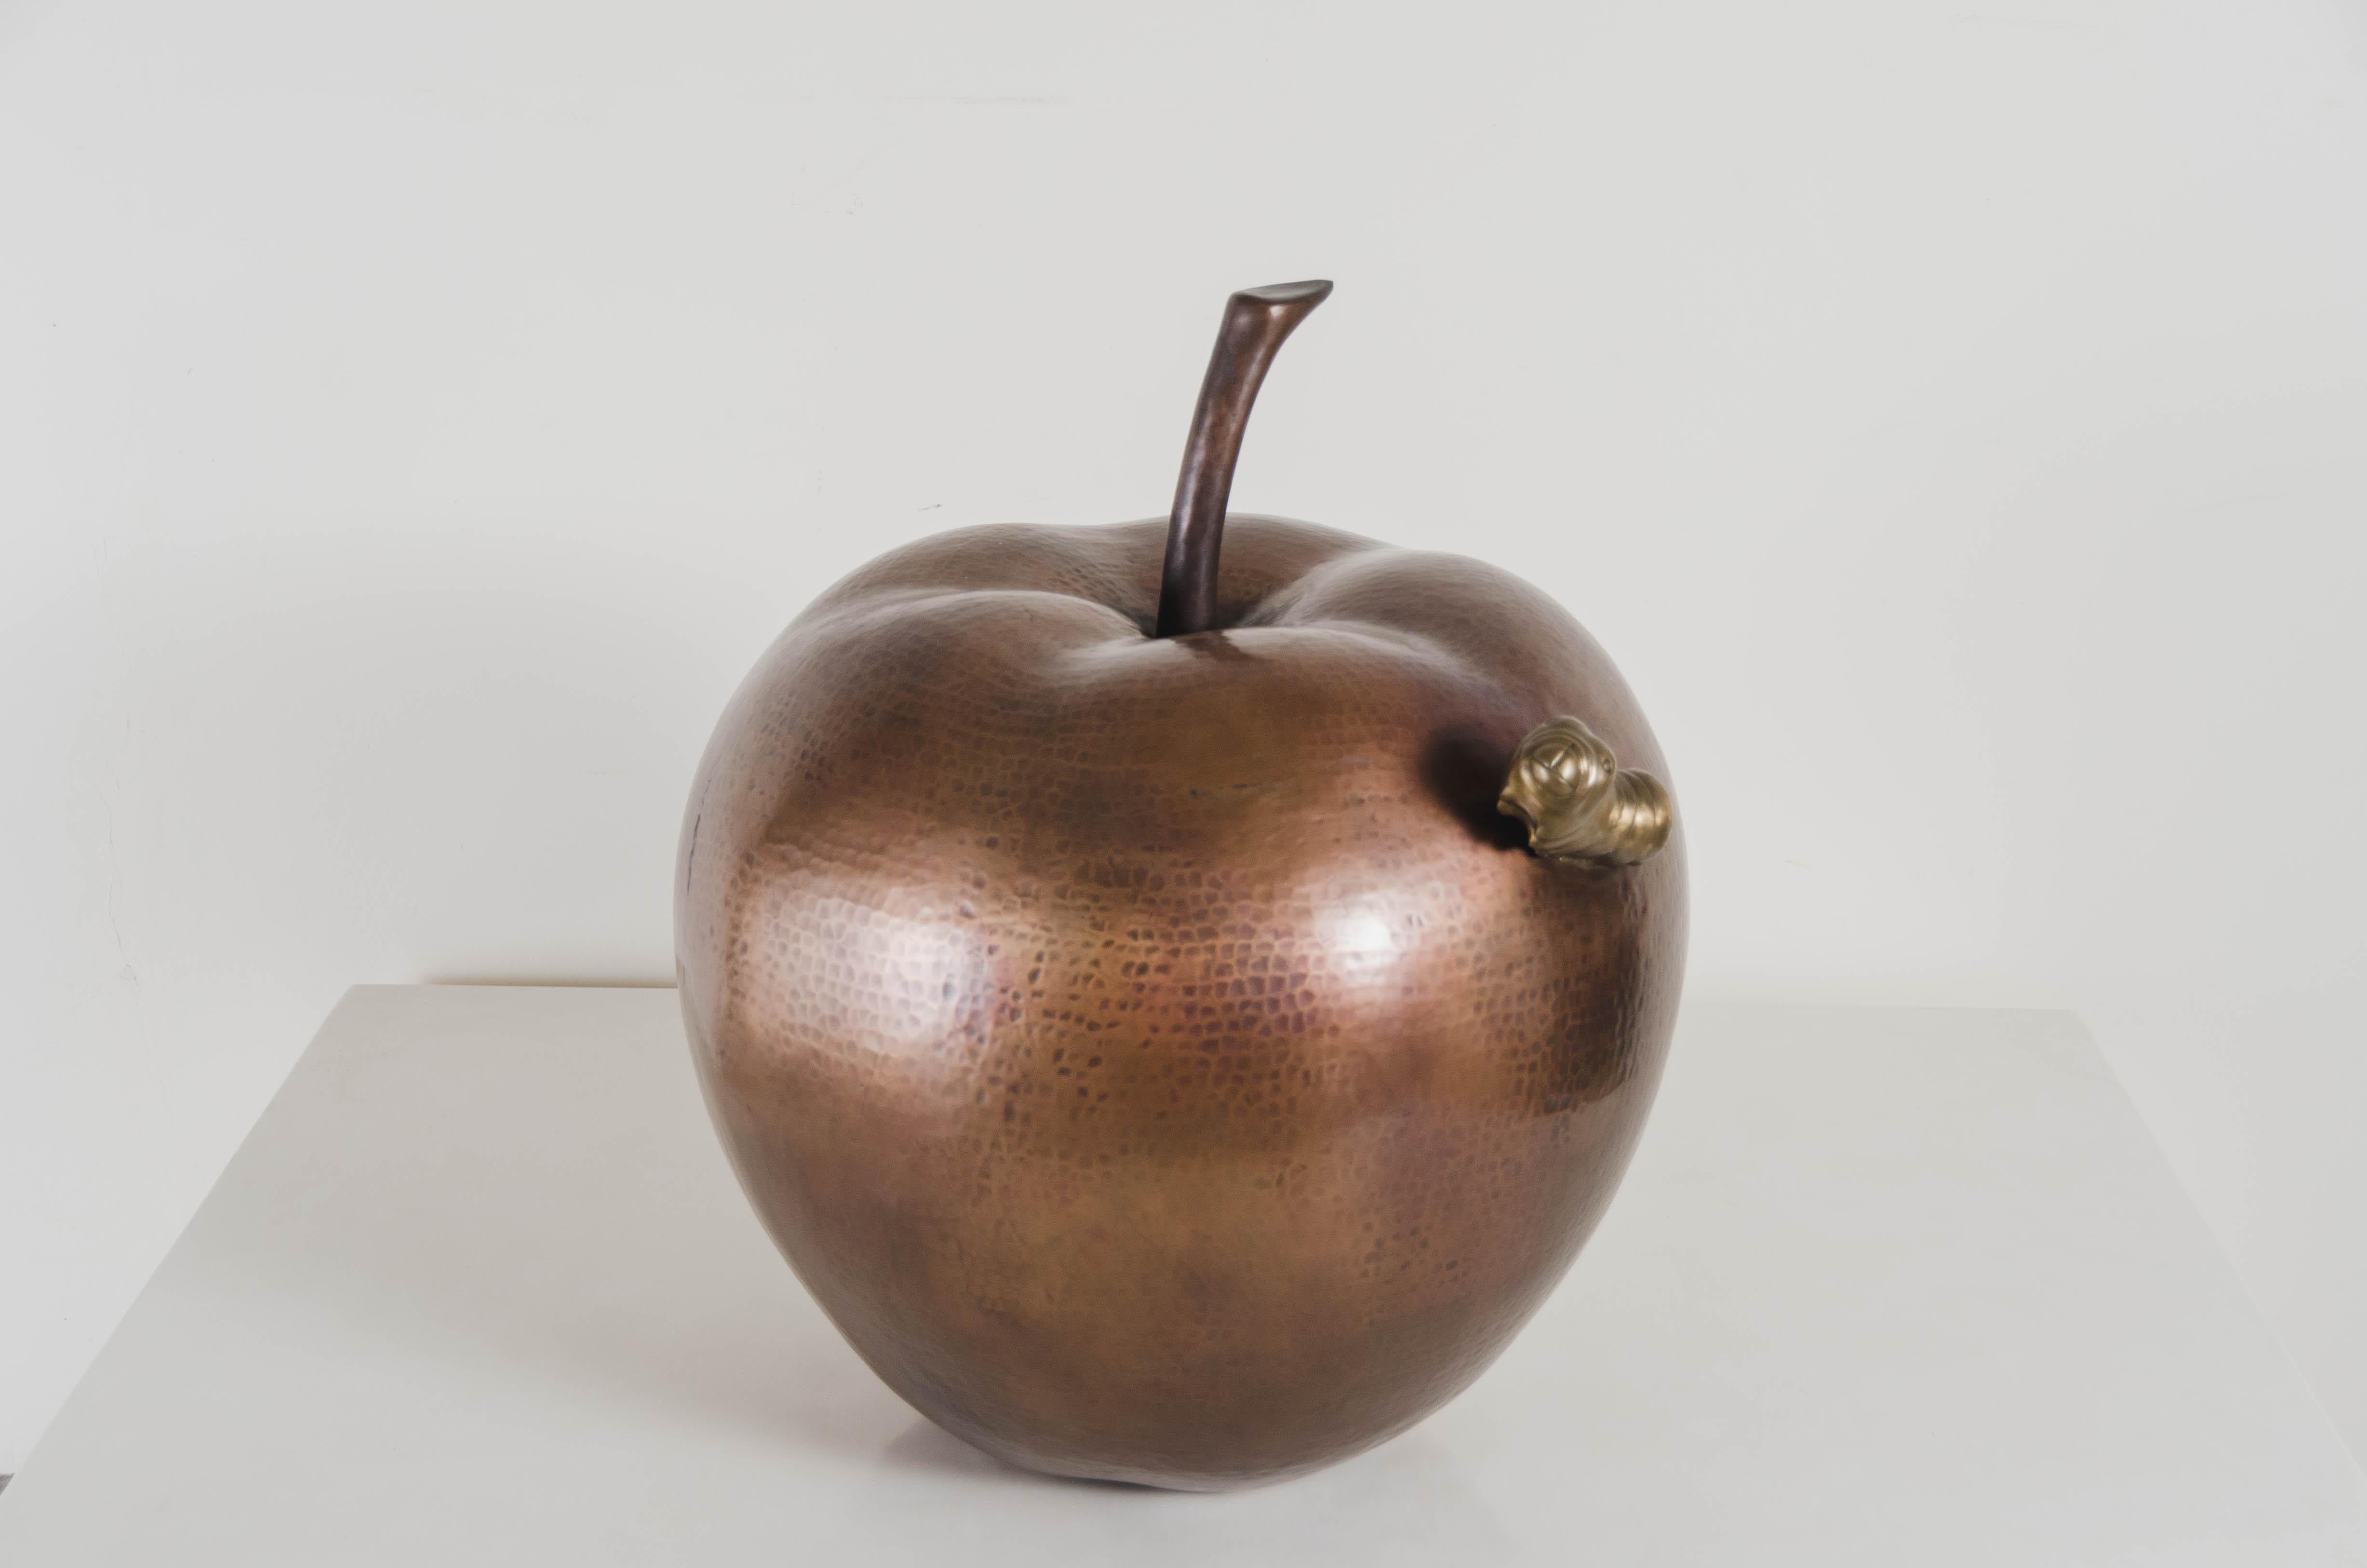 Apple with worm sculpture
Antique copper
Brass
Hand Repoussé
Limited Edition
Each piece is individually crafted and is unique. 

Repoussé is the traditional art of hand-hammering decorative relief onto sheet metal. The technique originated